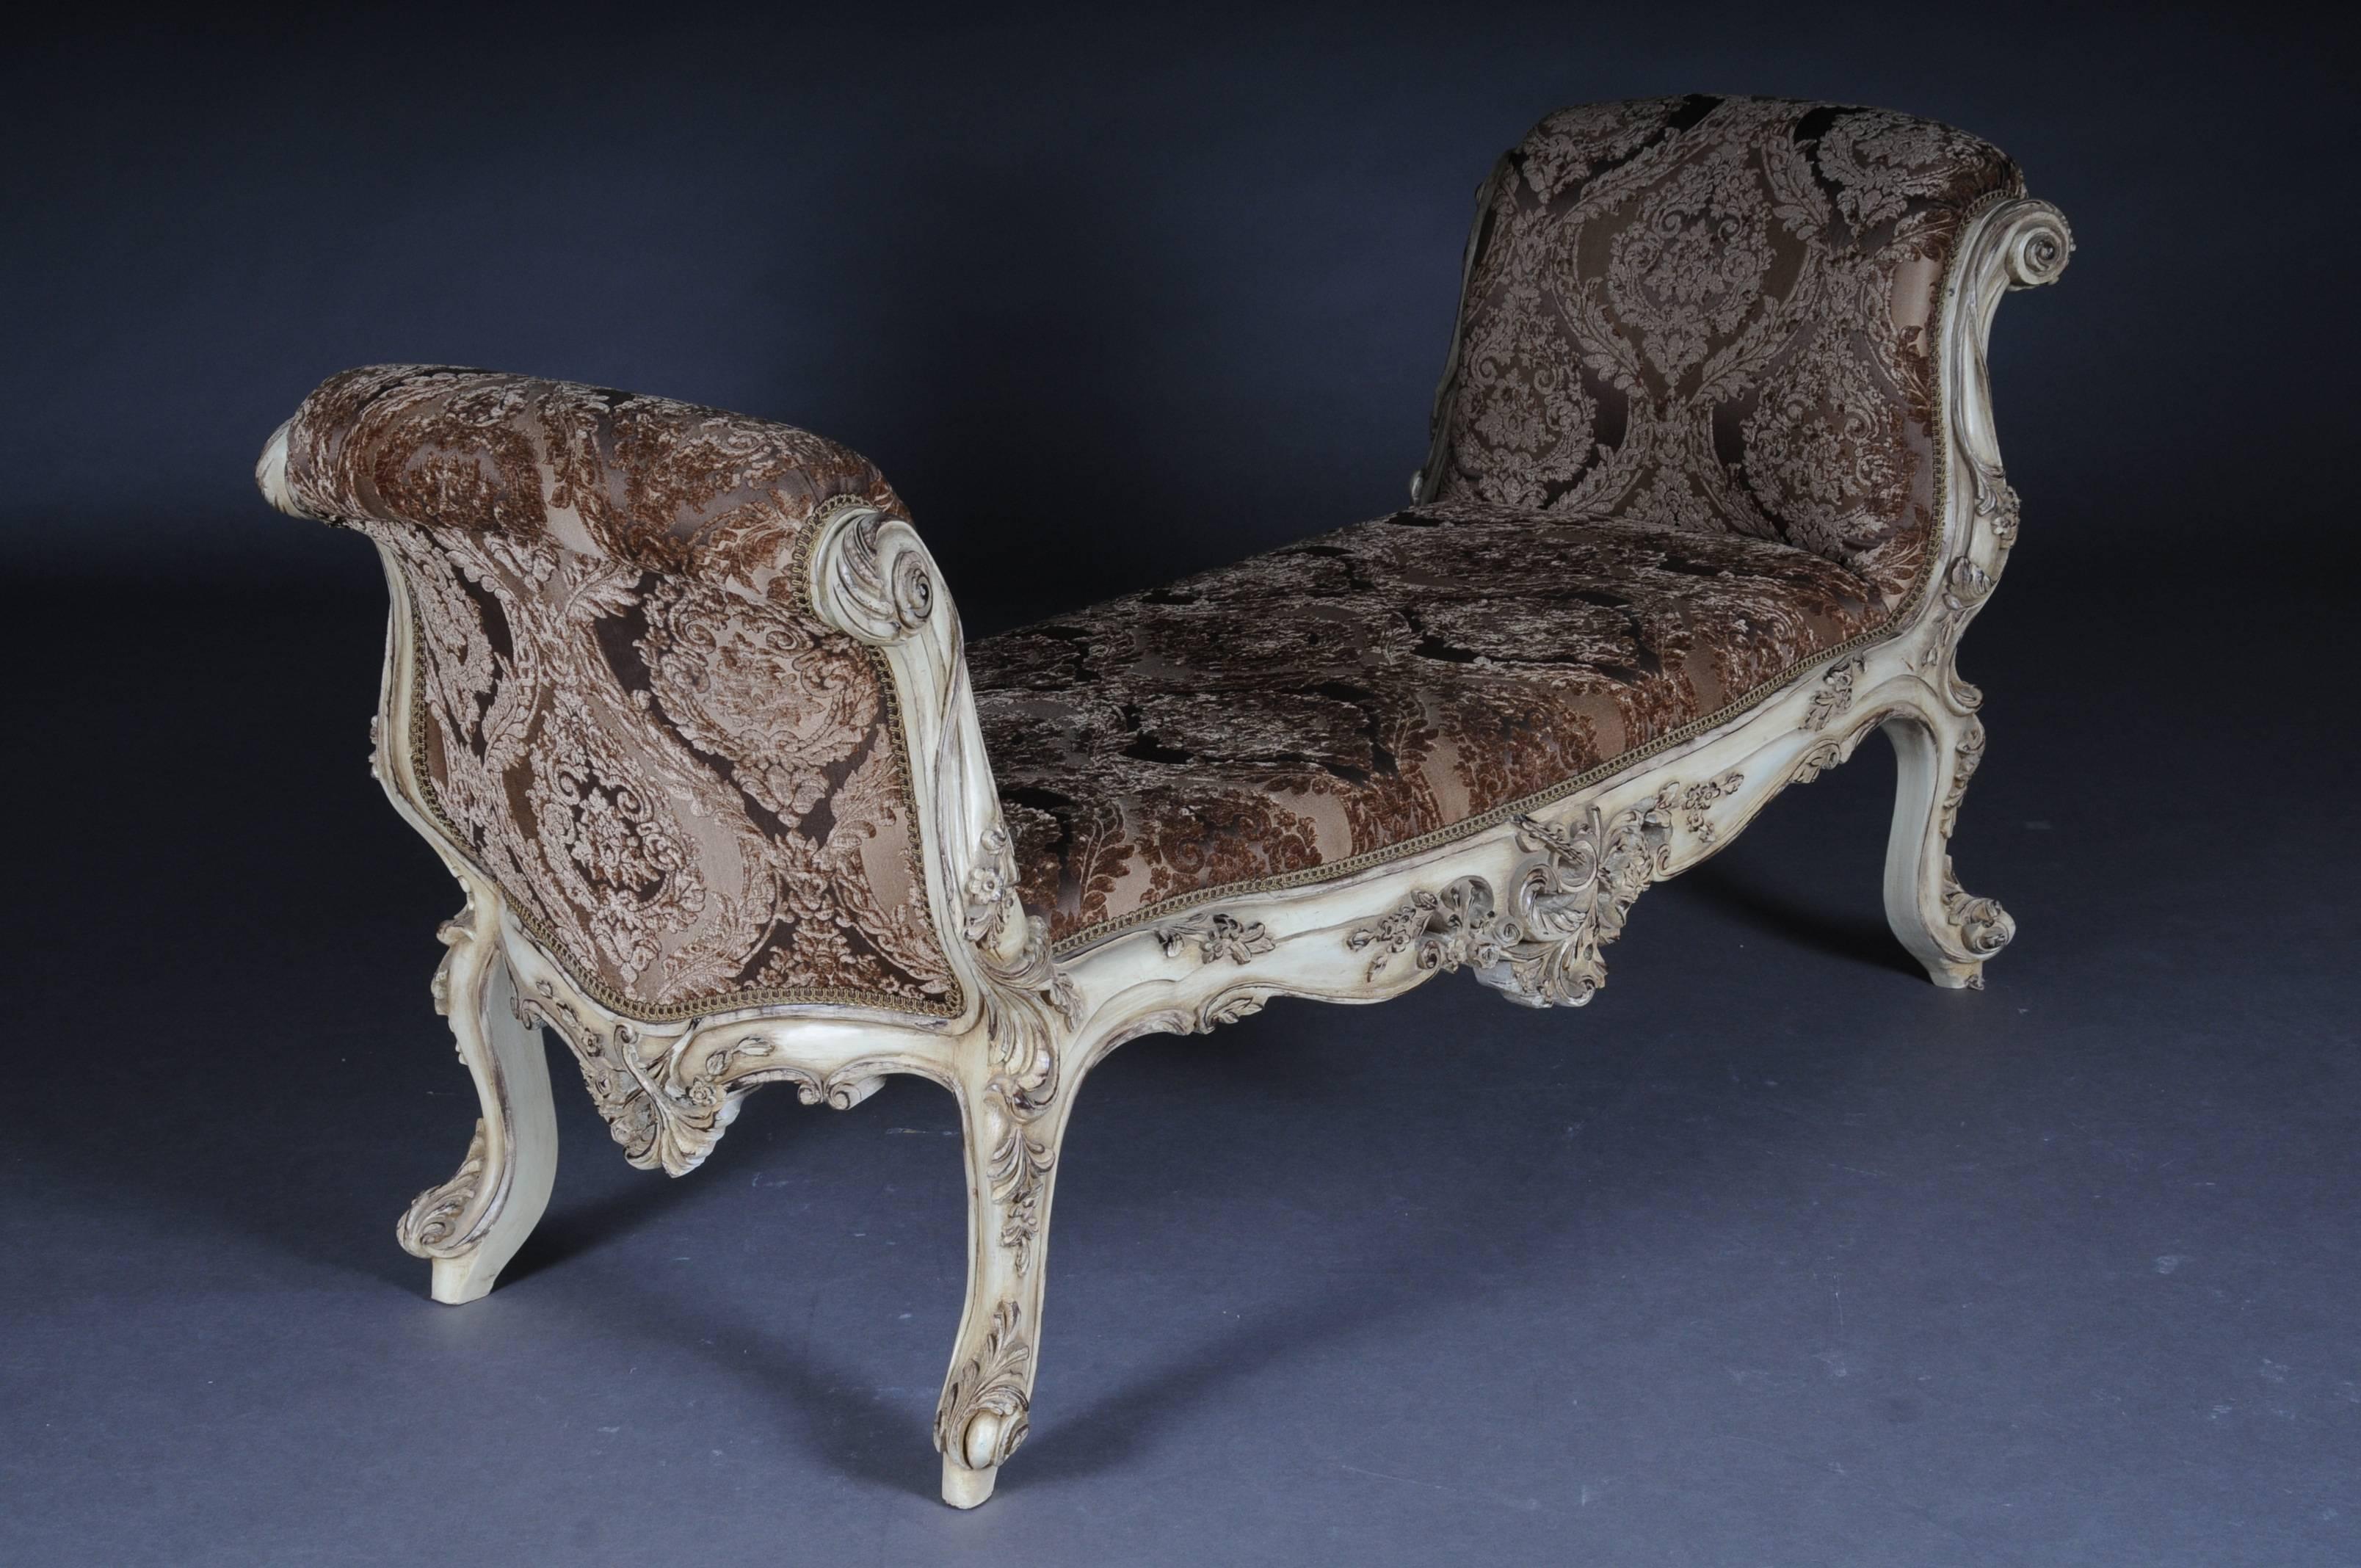 Hand-Carved Luxurious French Bench, Gondola in the Louis Seize XVI